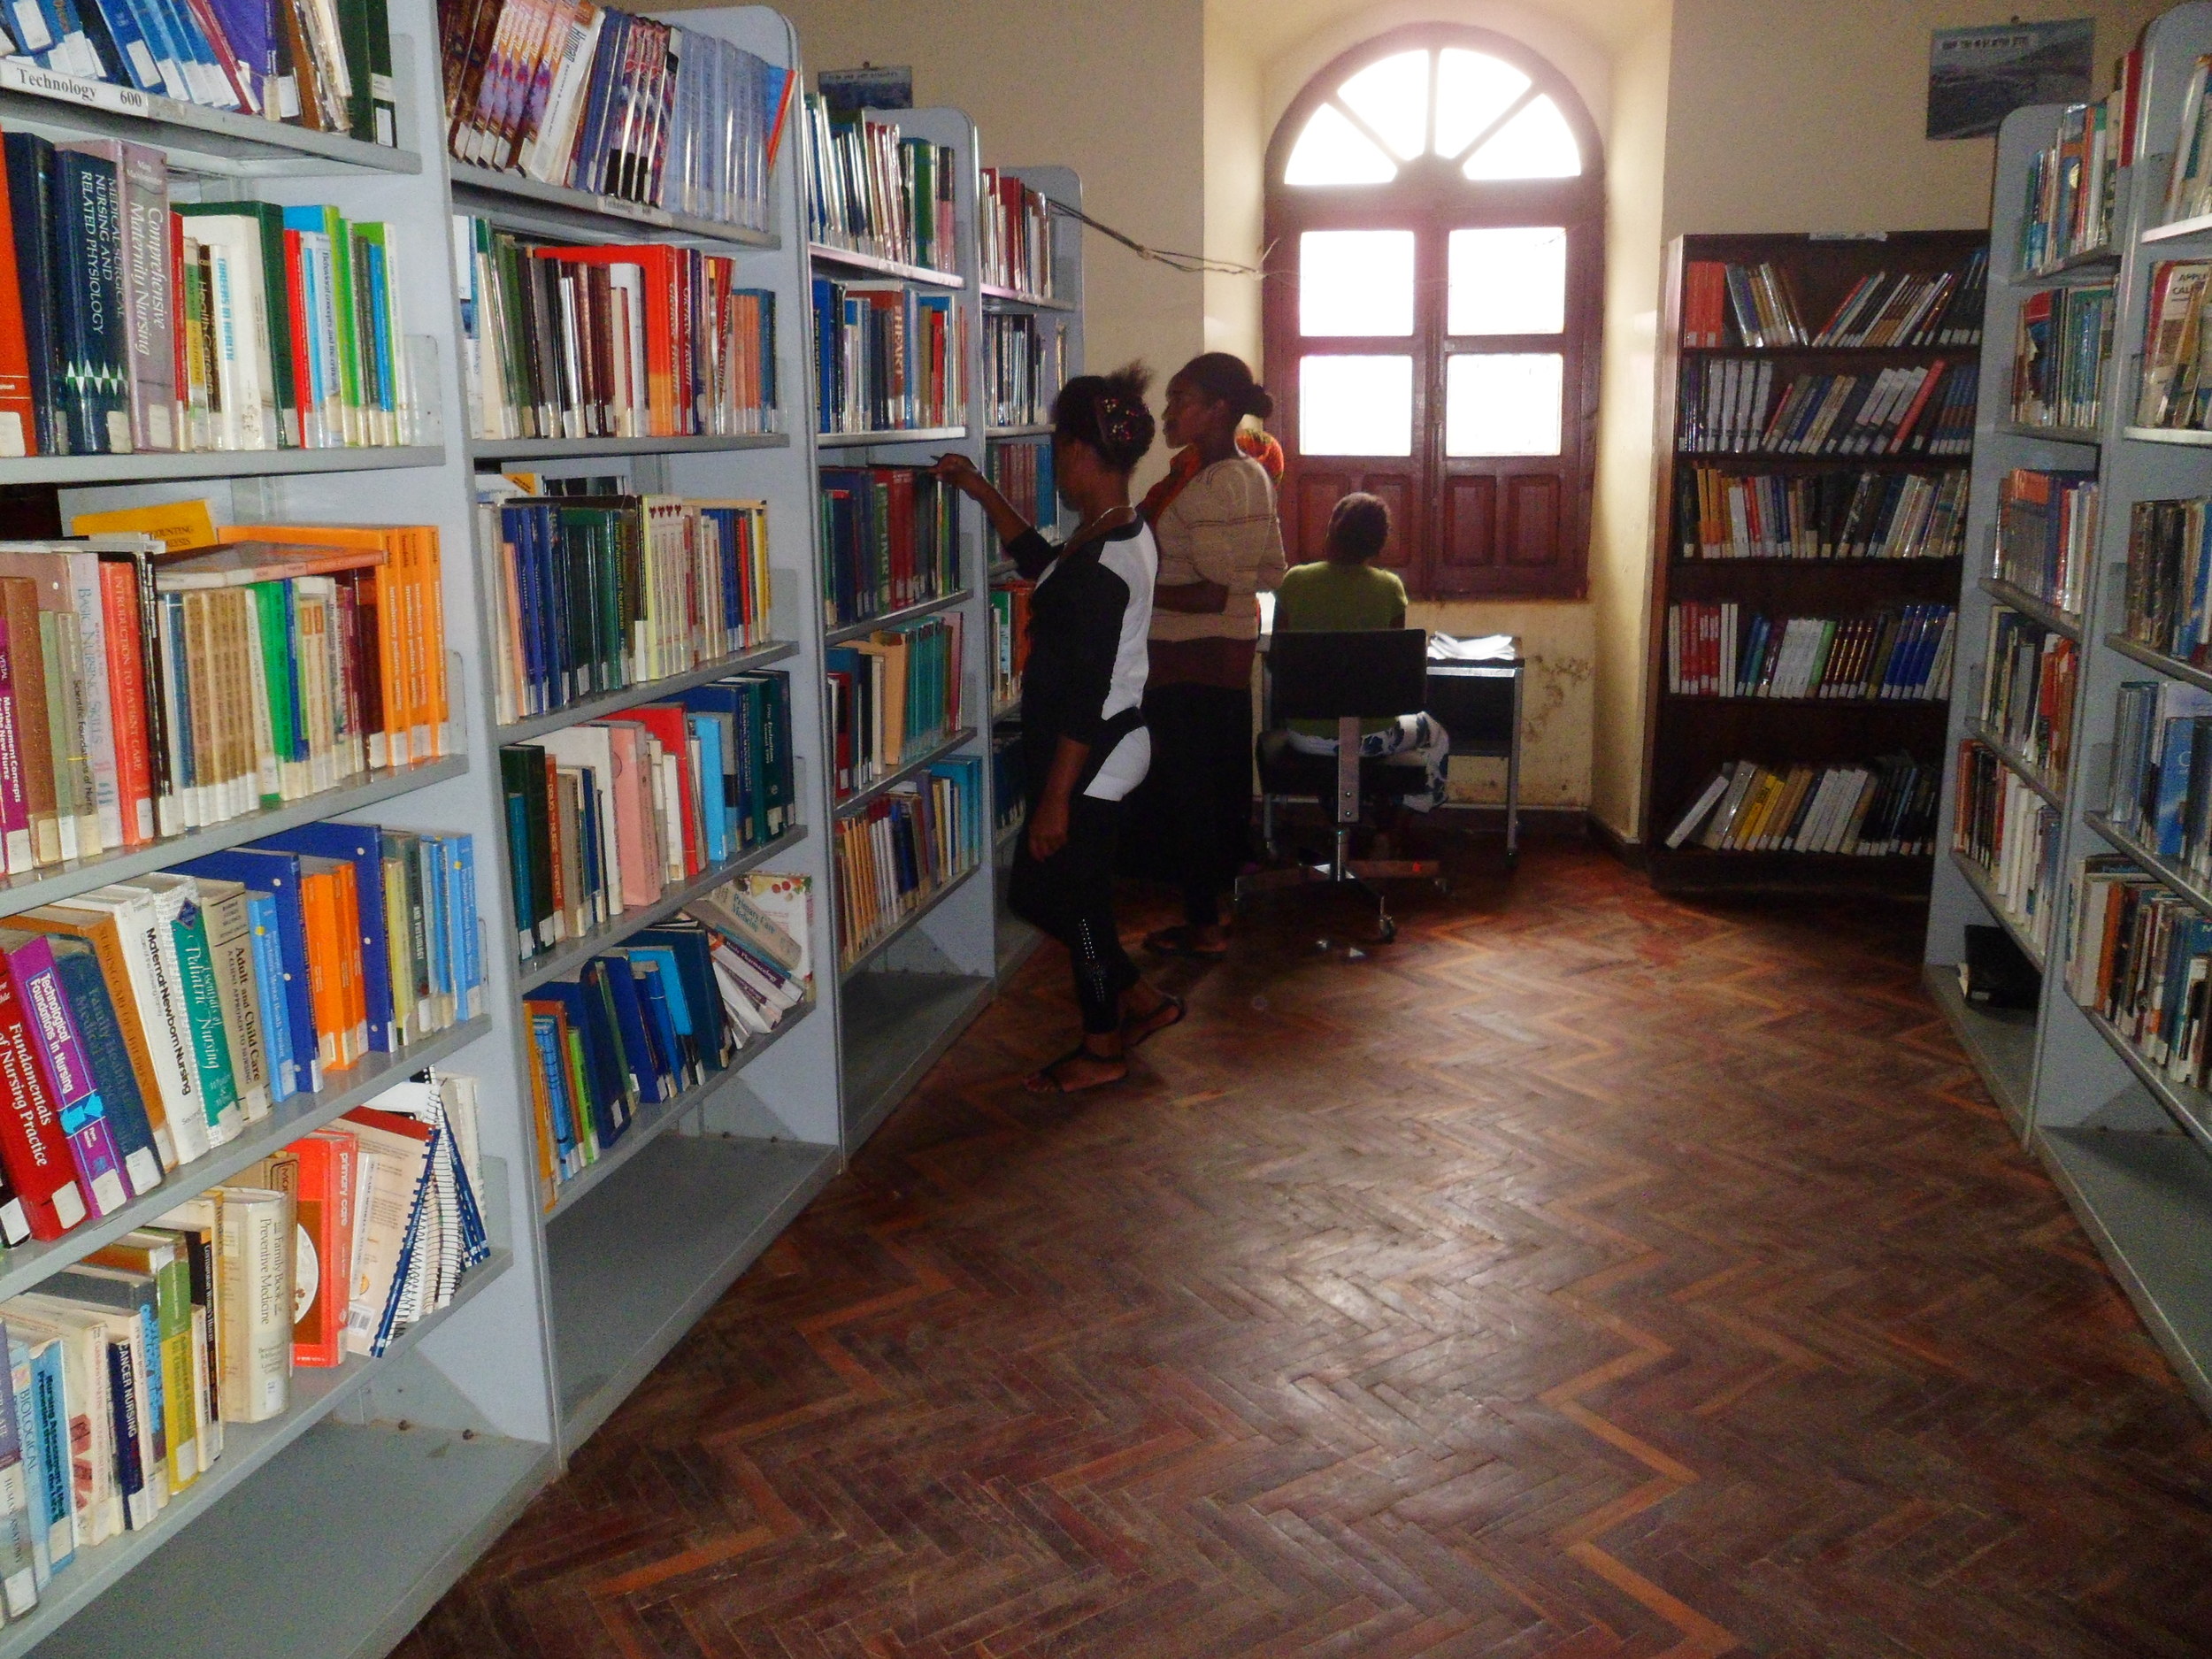  With 20,000 books in its possession, the library offers resources that are unavailable anywhere else in the city. 